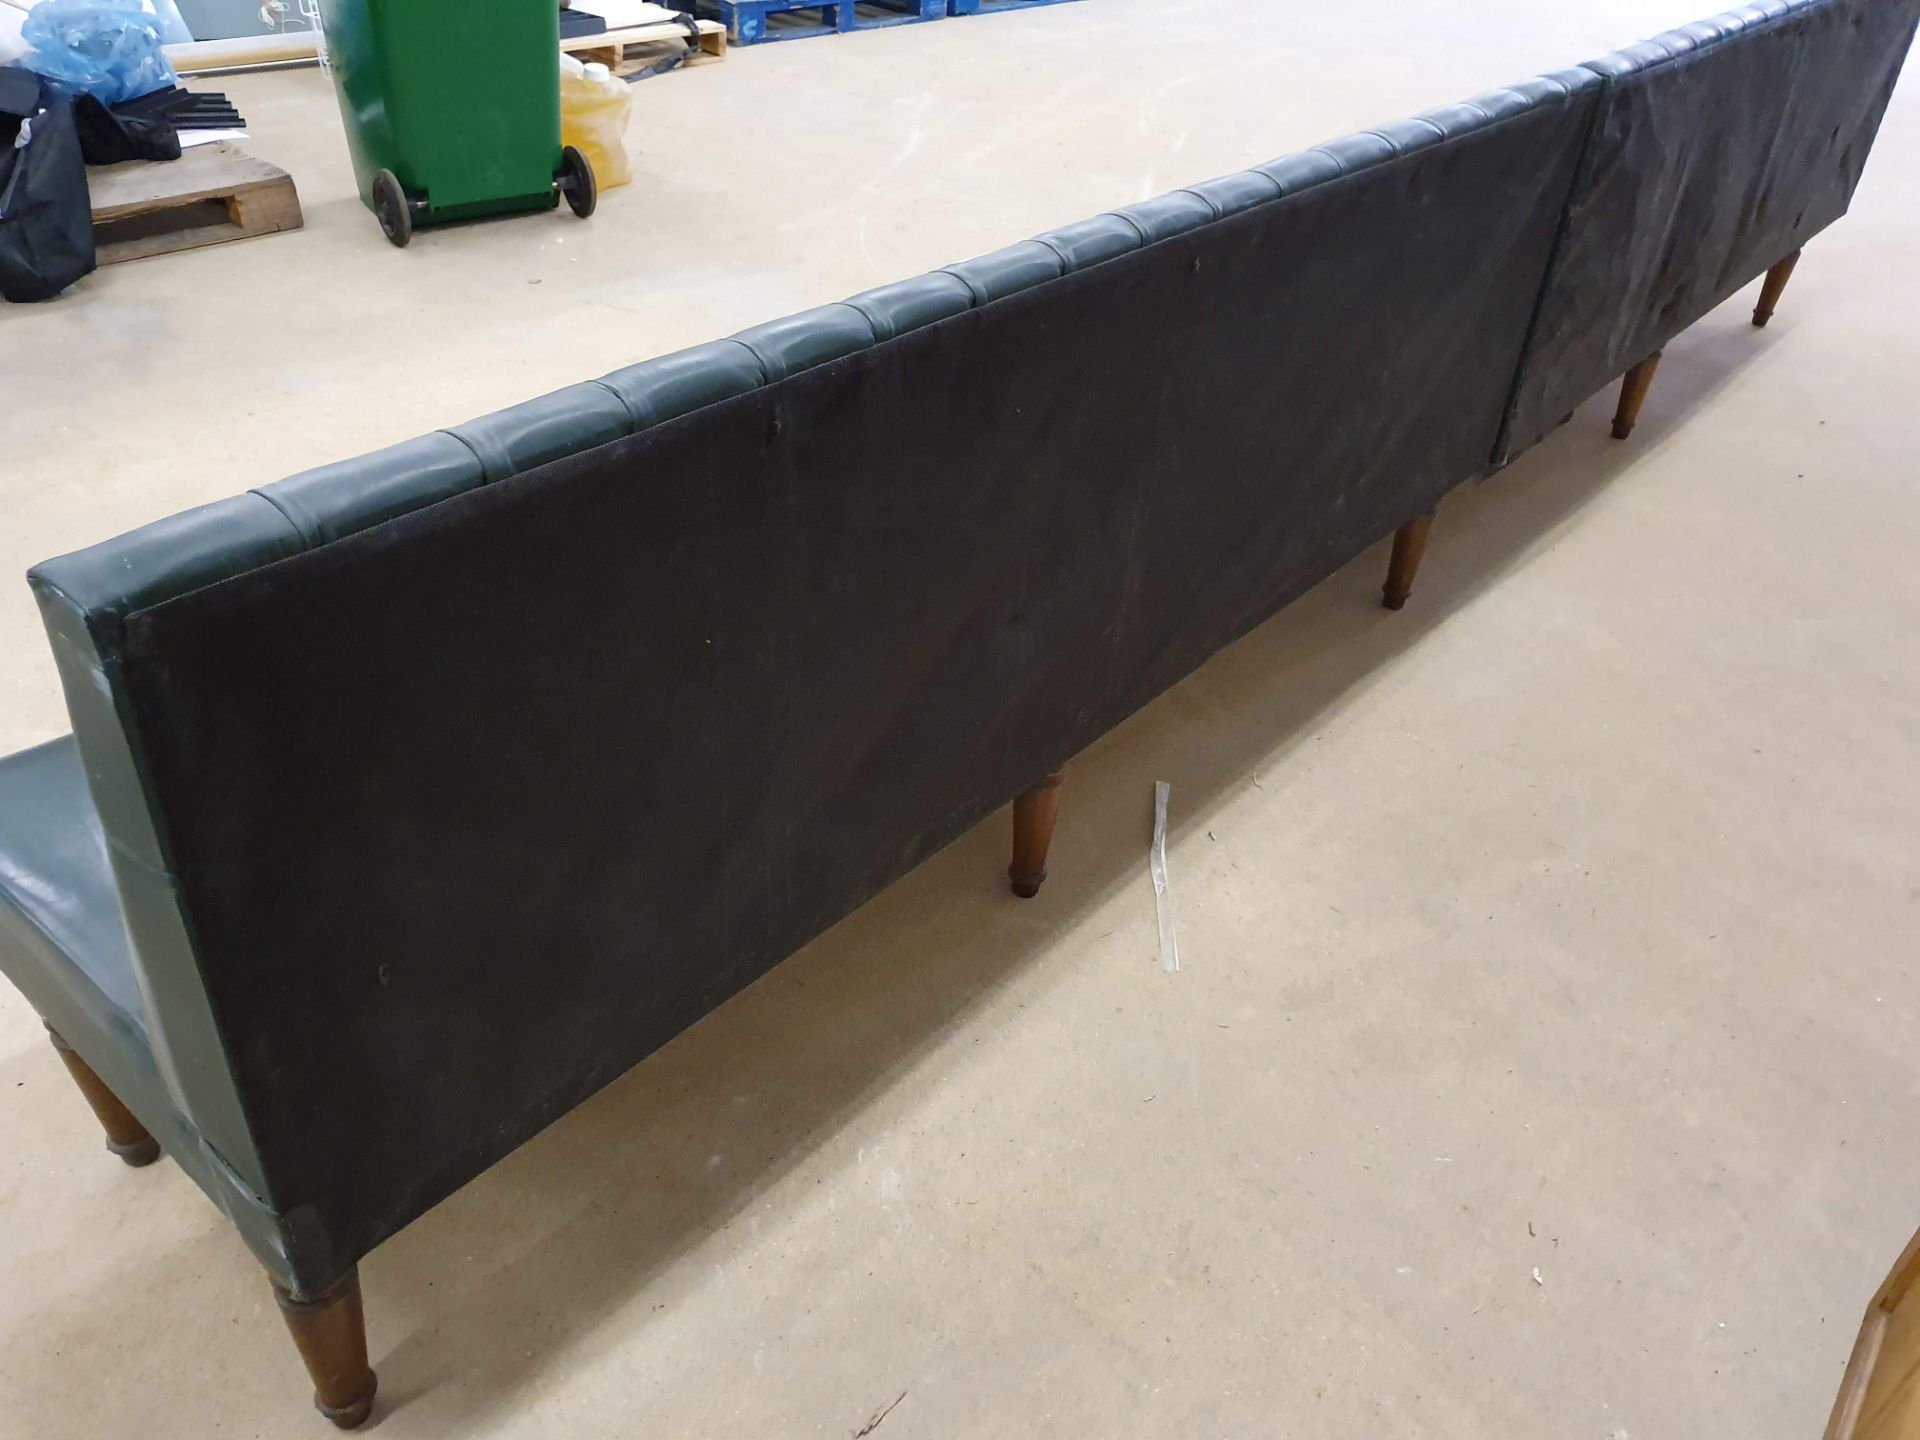 1 x Restaurant Seating Bench Upholstery in Green With Studded Back and Oak Turned Legs - H91 - Image 9 of 10